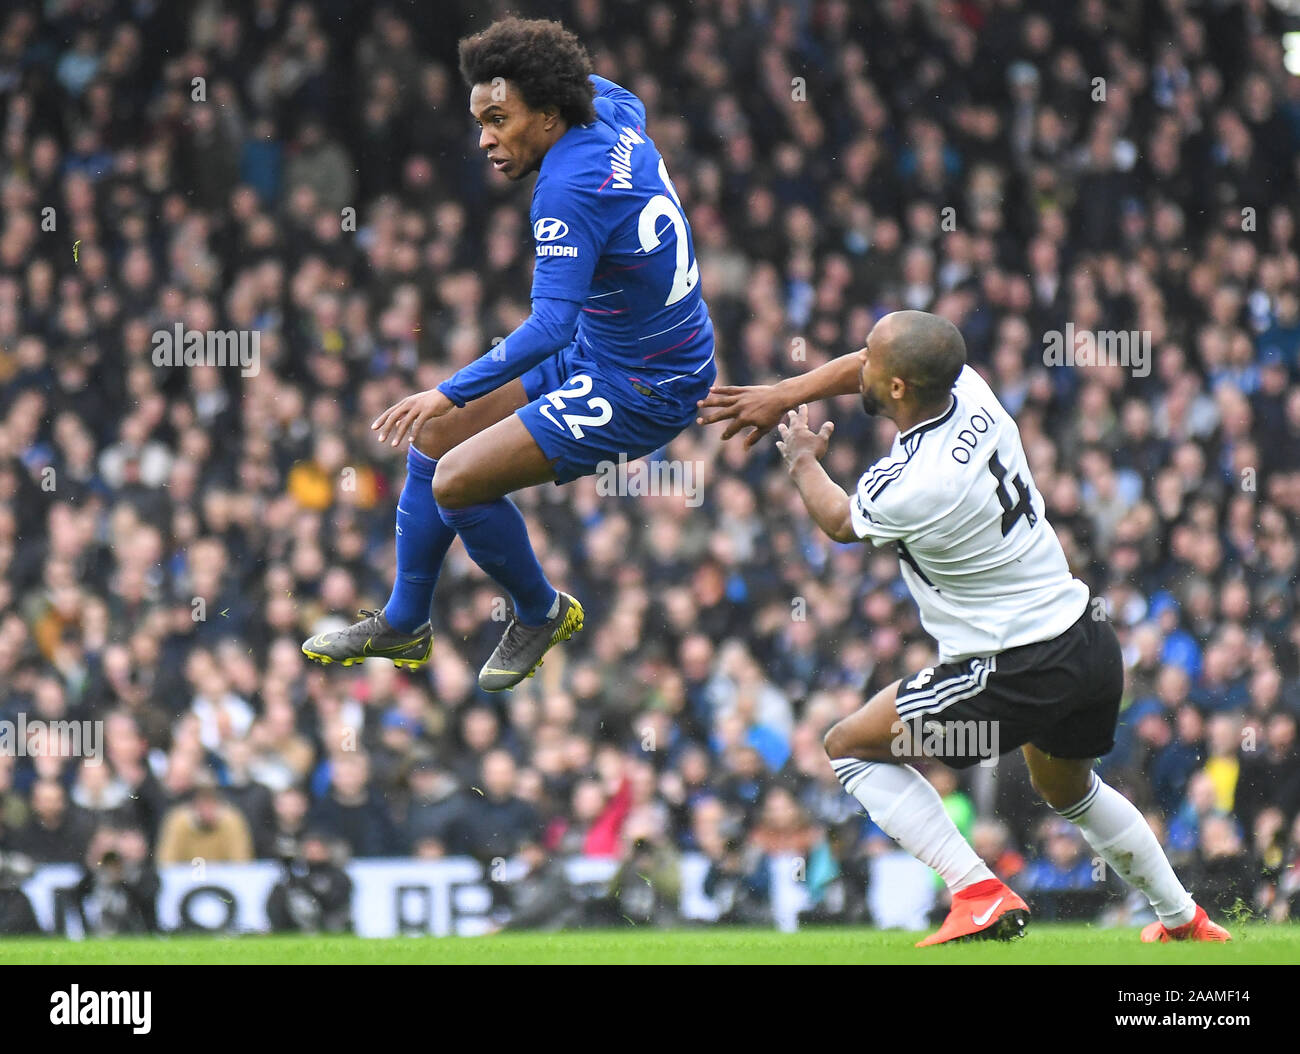 LONDON, ENGLAND - MARCH 3, 2019: Willian Borges da Silva of Chelsea and Denis Odoi of Fulham pictured during the 2018/19 Premier League game between Fulham FC and Chelsea FC at Craven Cottage. Stock Photo